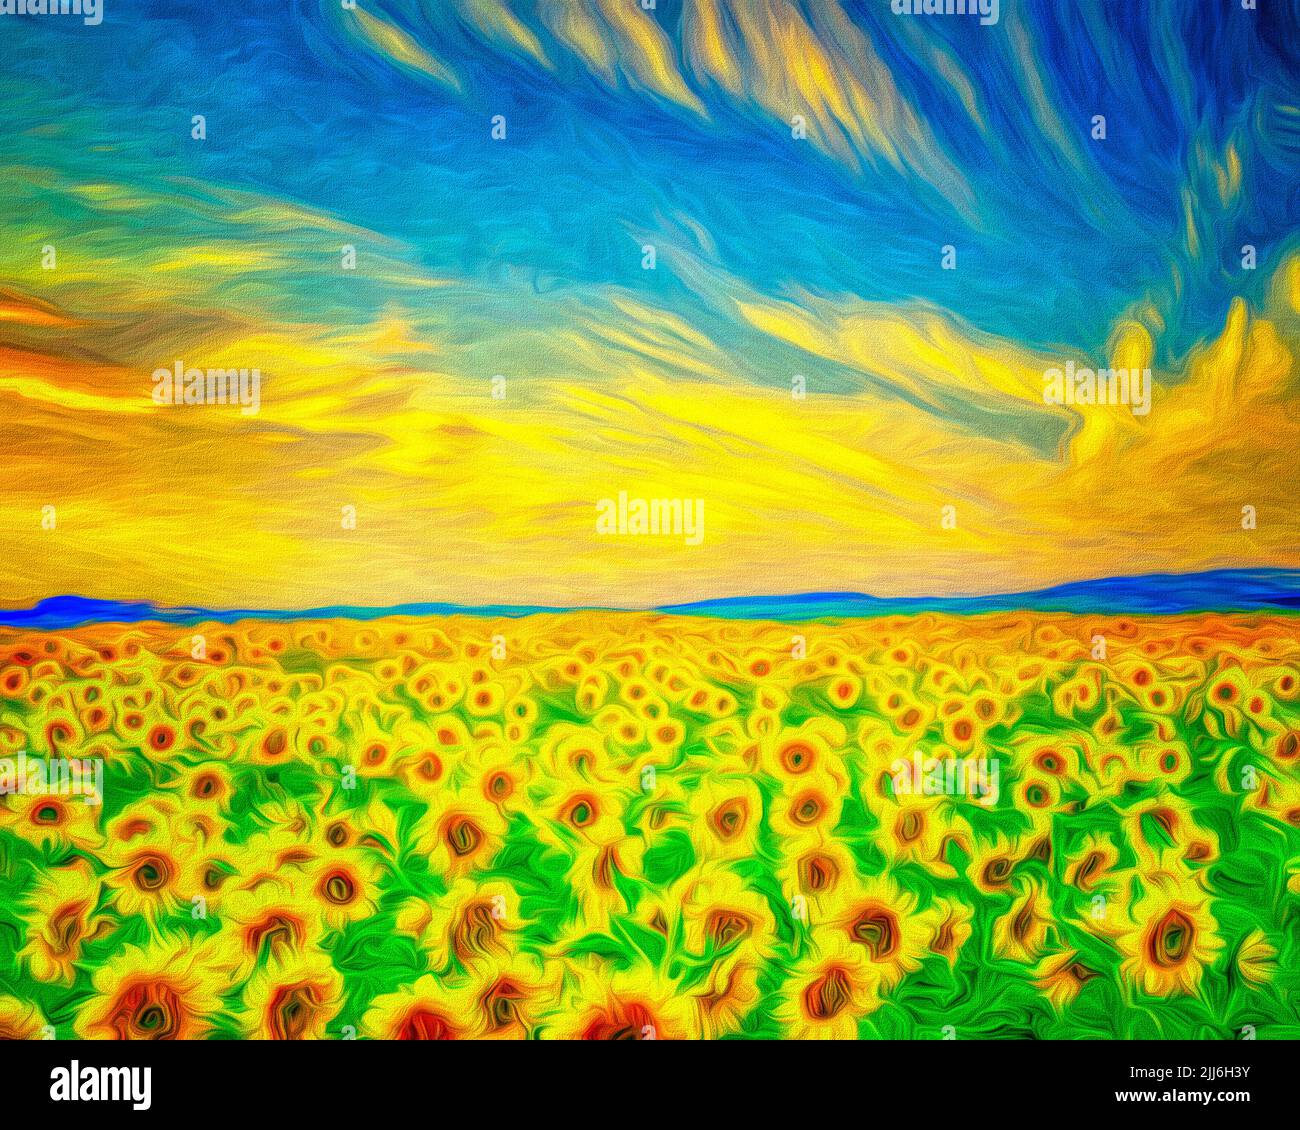 CONTEMPORARY ART: Field of Sunflowers in Provence (France) Stock Photo